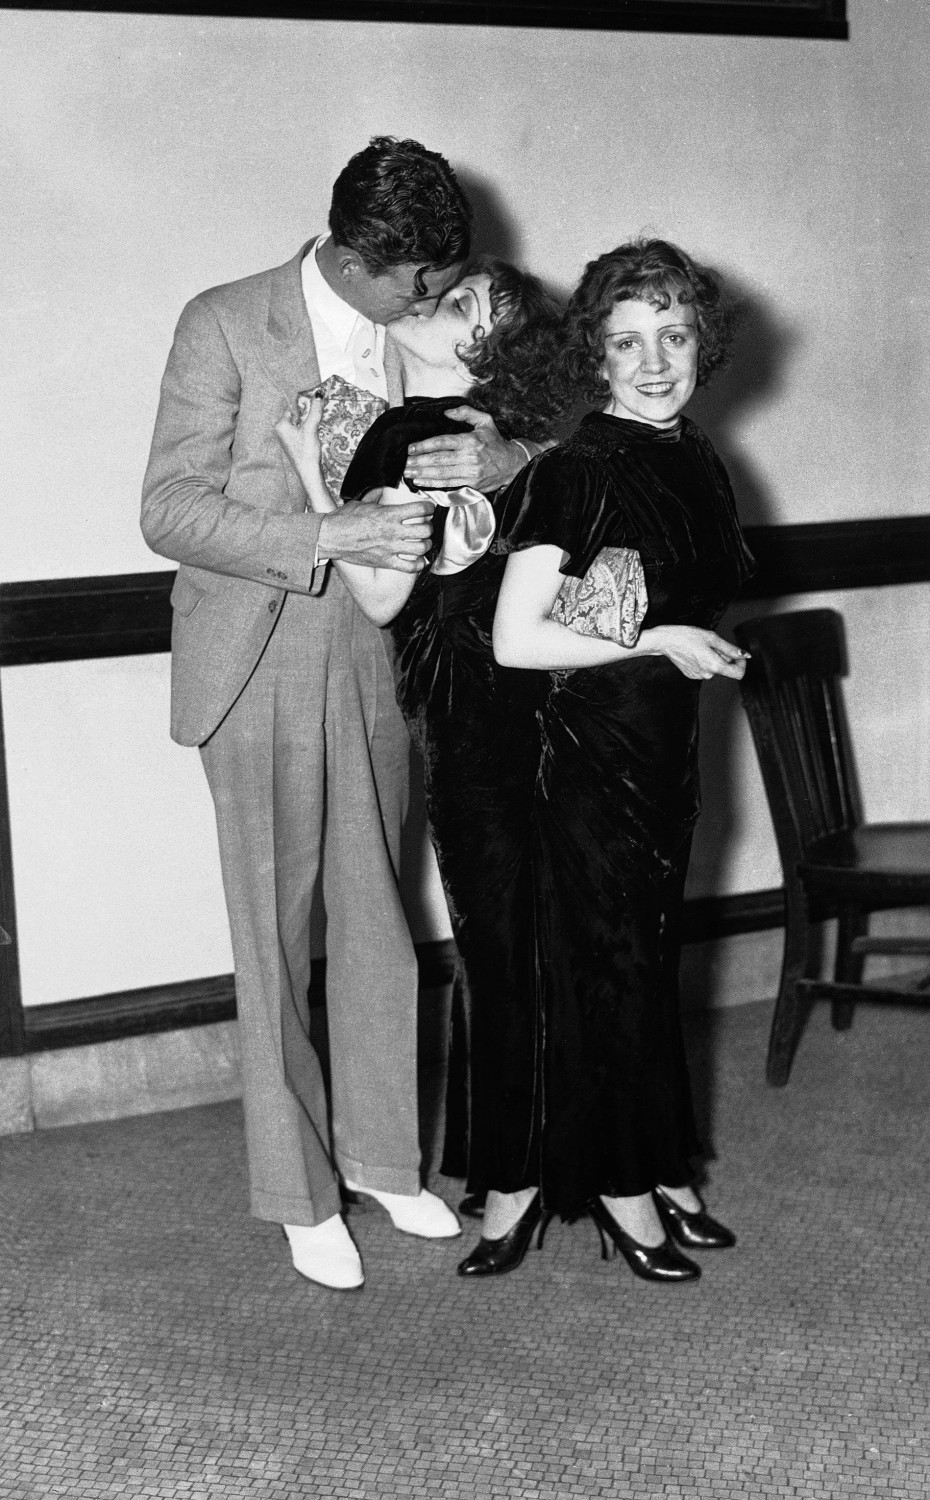 With Maurice Lambert (Violet's fiancee)